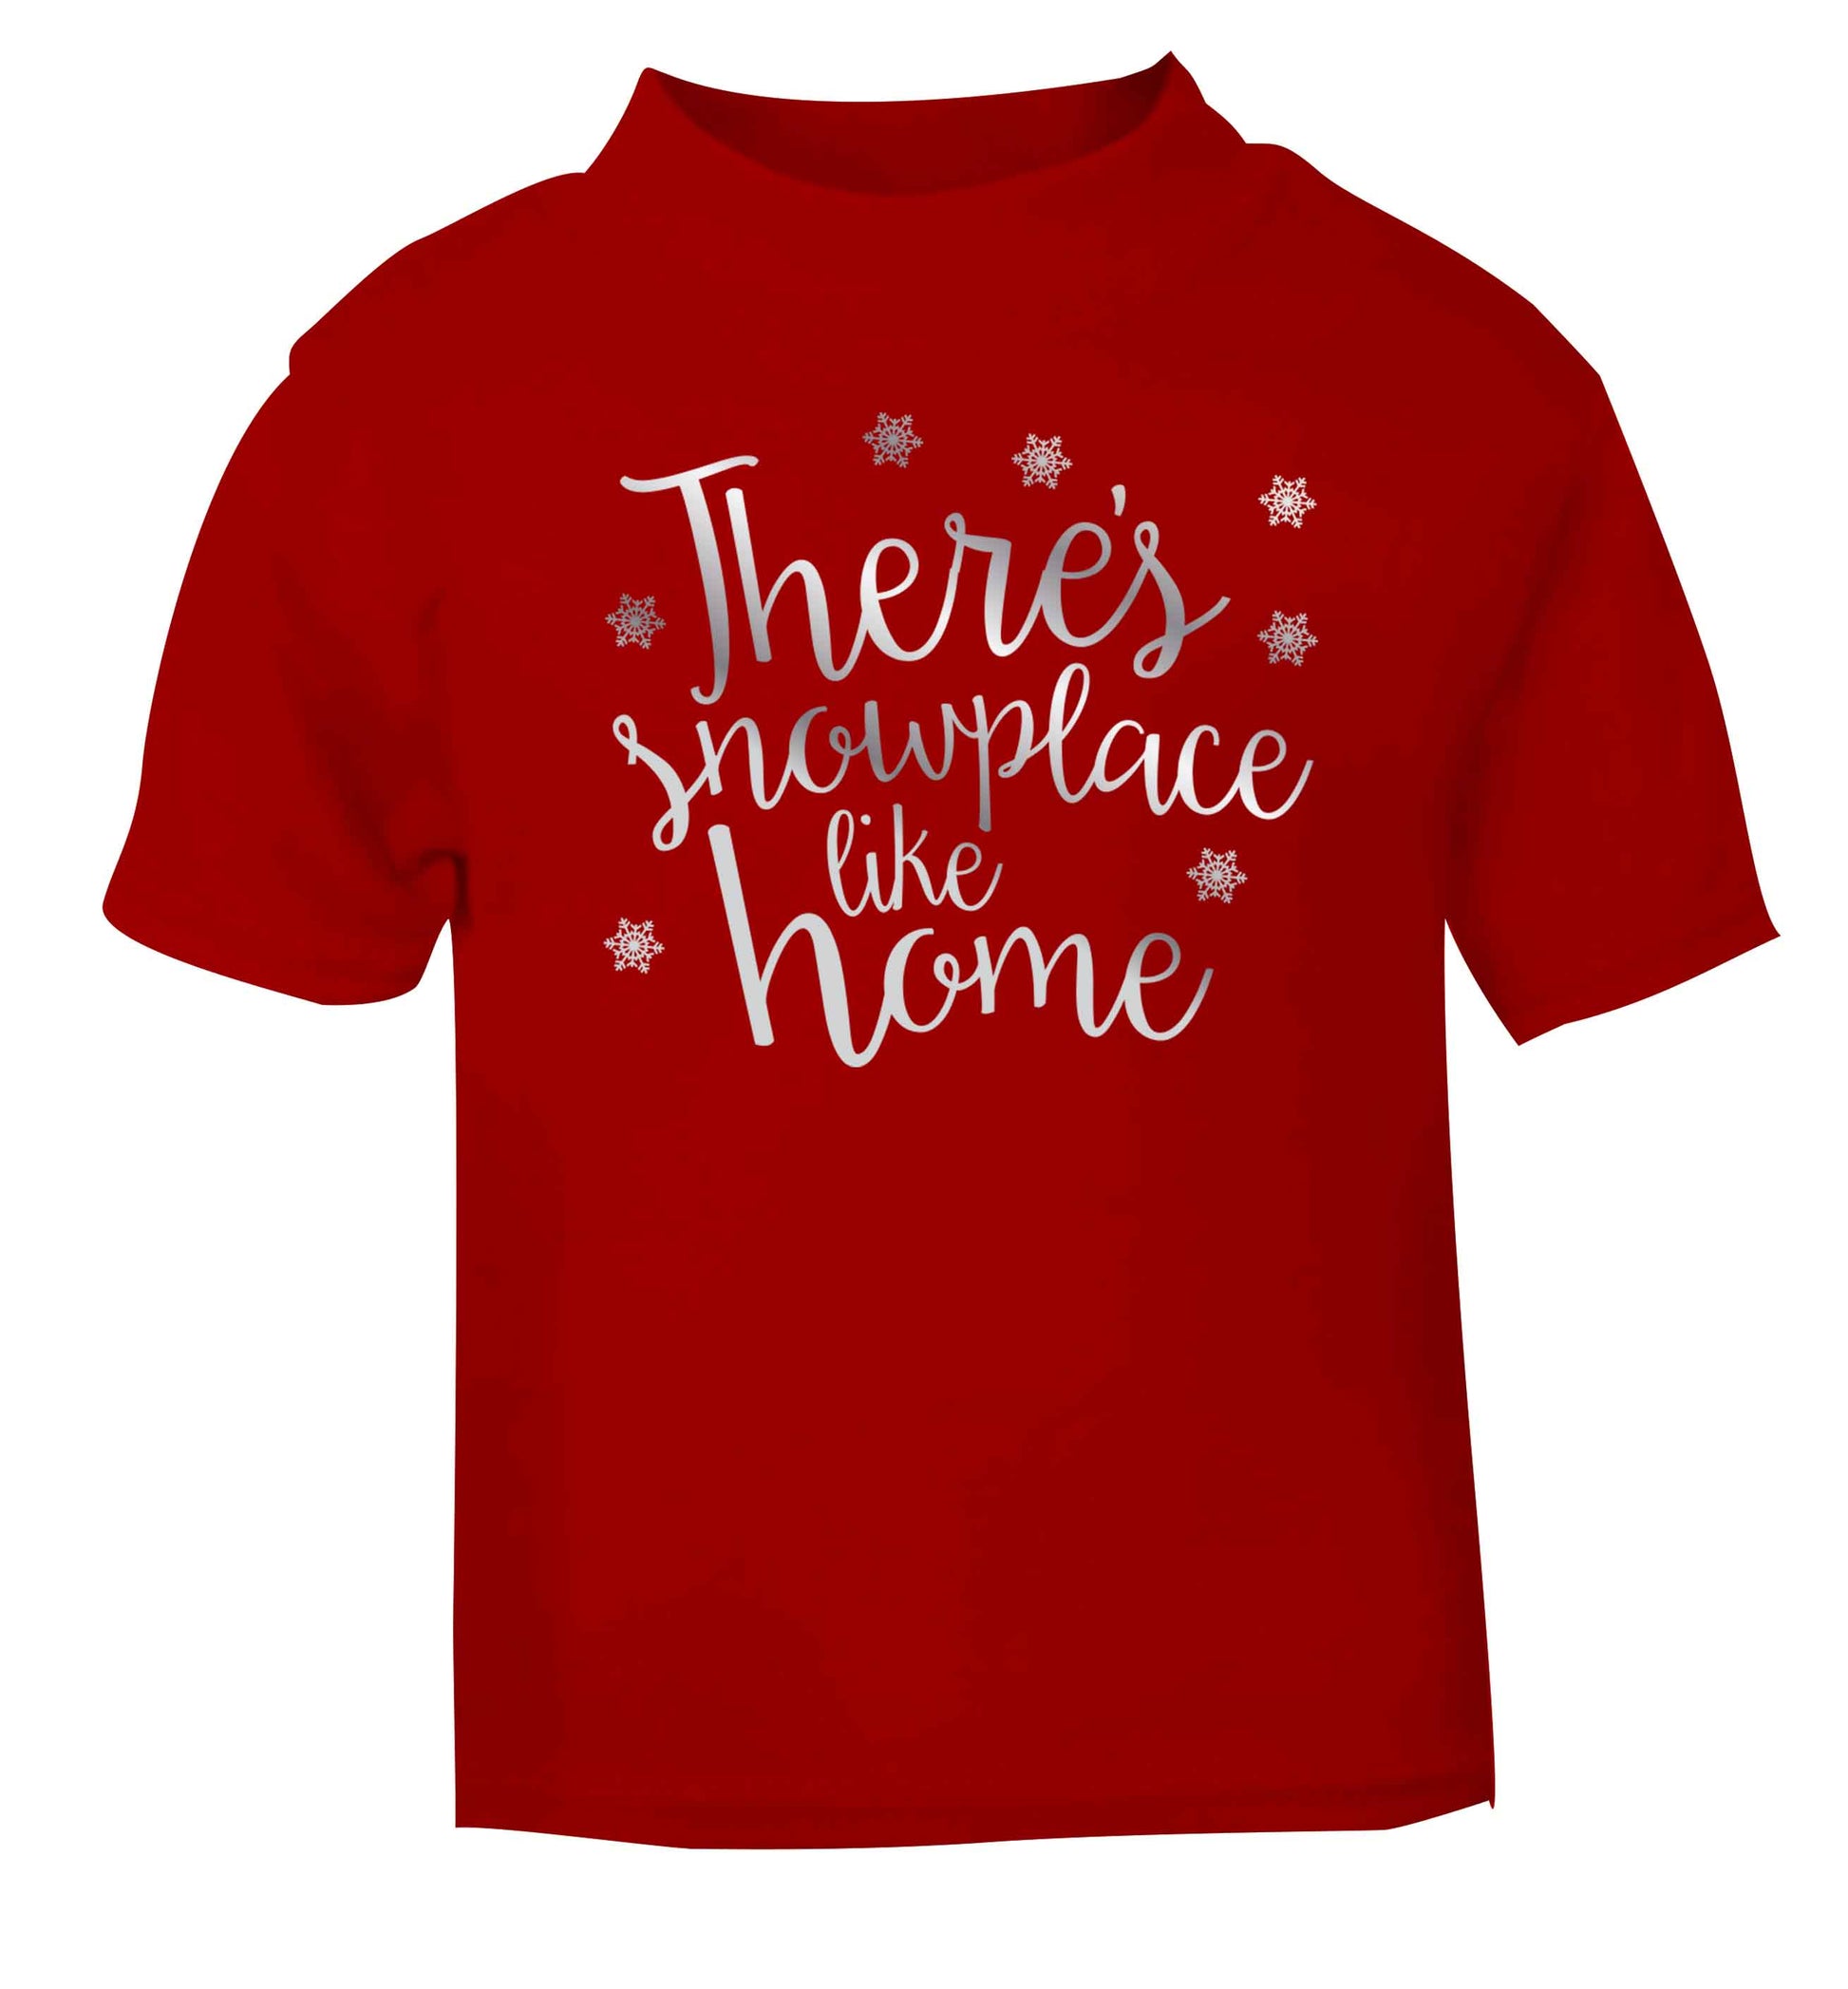 There's snowplace like home - metallic silver red baby toddler Tshirt 2 Years